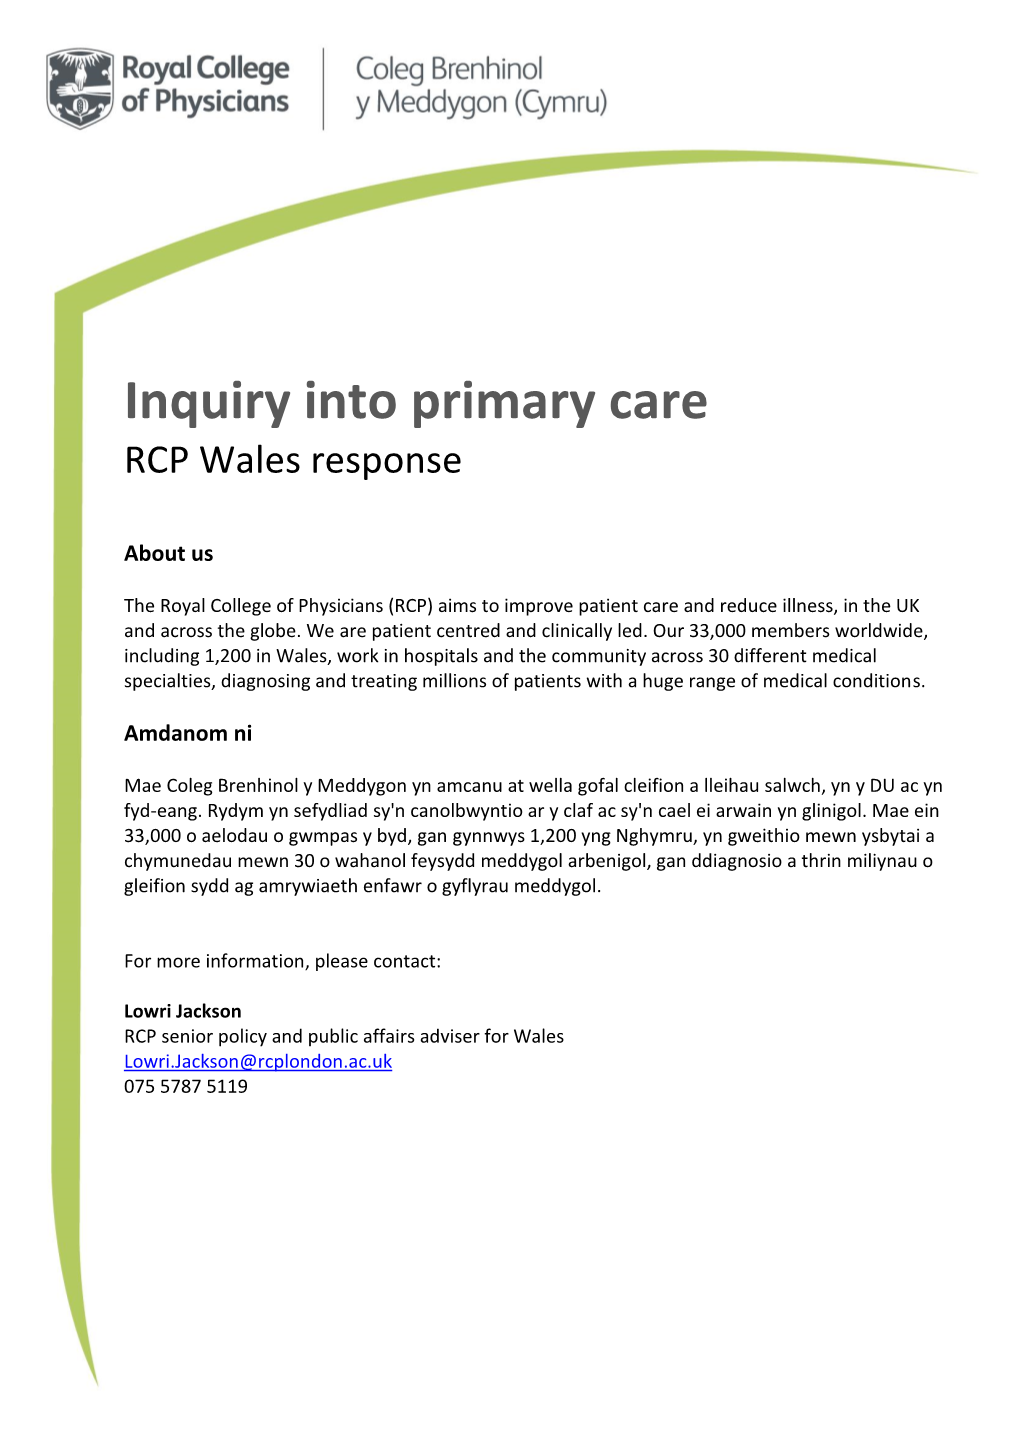 Inquiry Into Primary Care RCP Wales Response